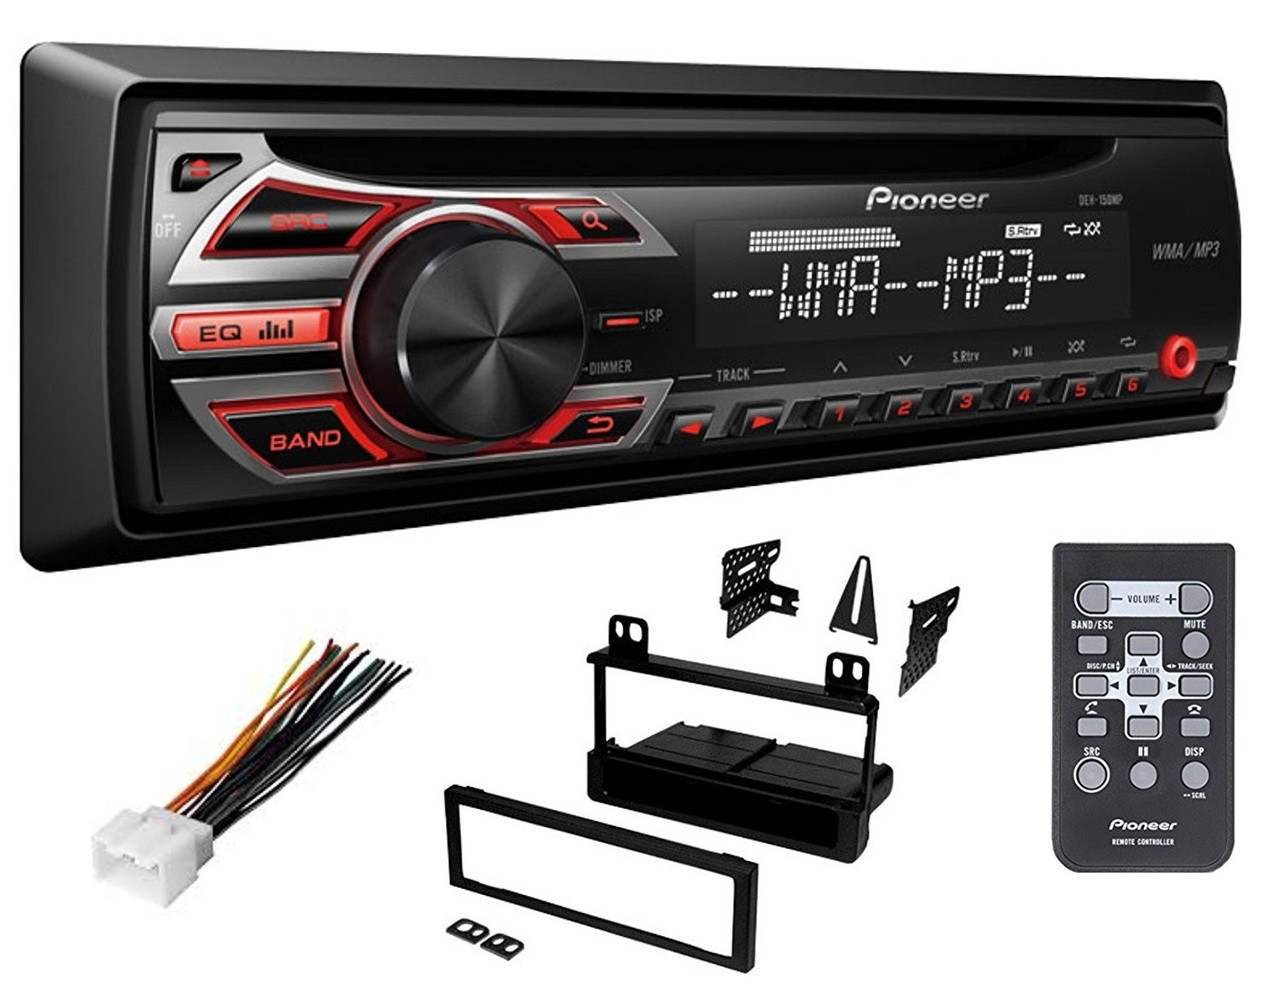 Pioneer Ford CD Car Stereo Radio Kit Dash Installation Mounting With Wiring Harness